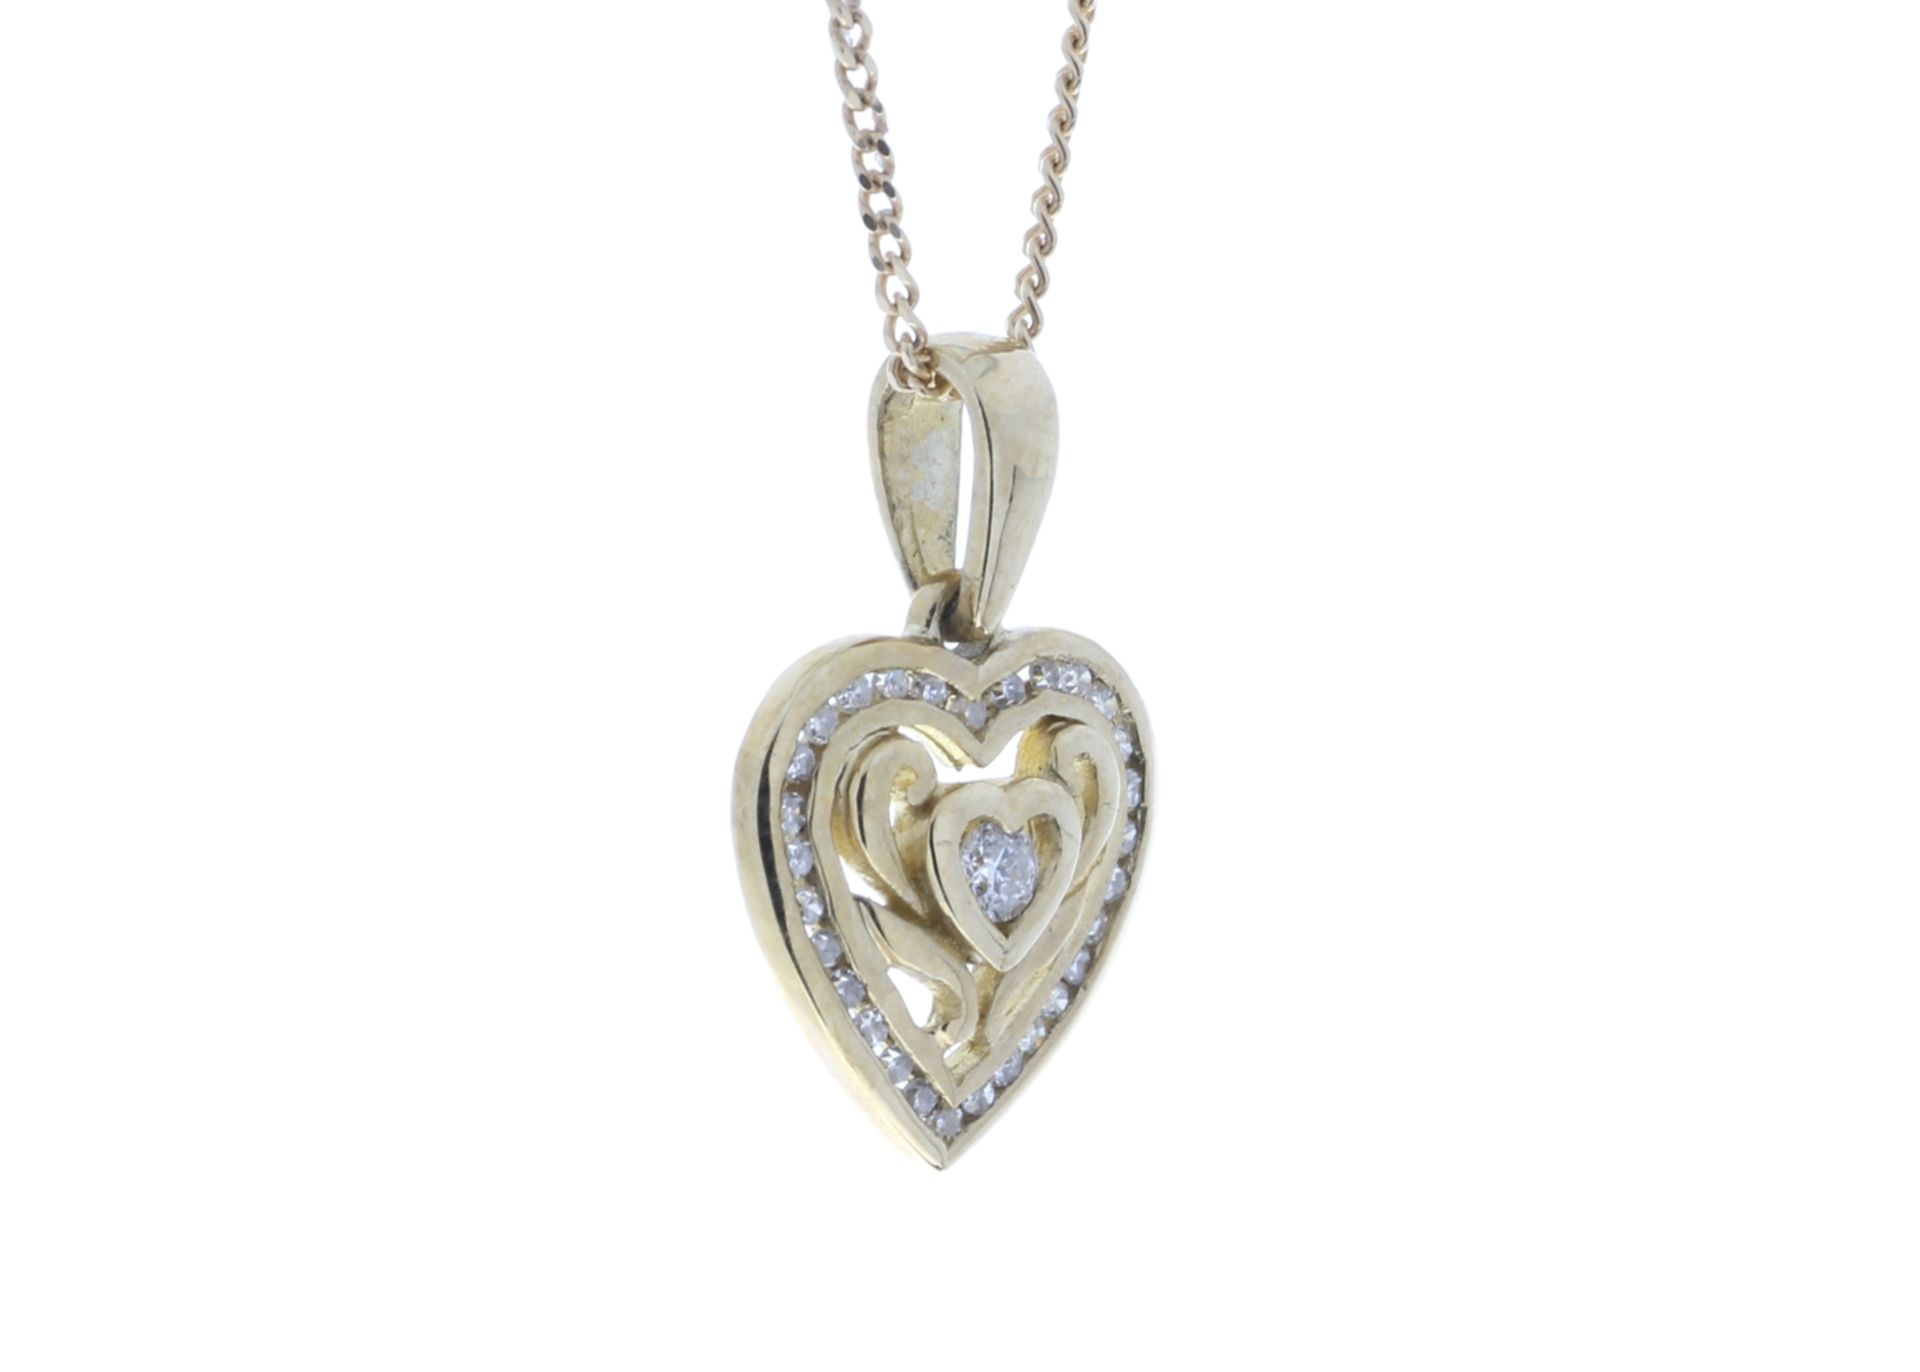 9ct Yellow Gold Heart Pendant Set With Diamonds With Centre Heart and Swirls 0.18 Carats - Image 2 of 4